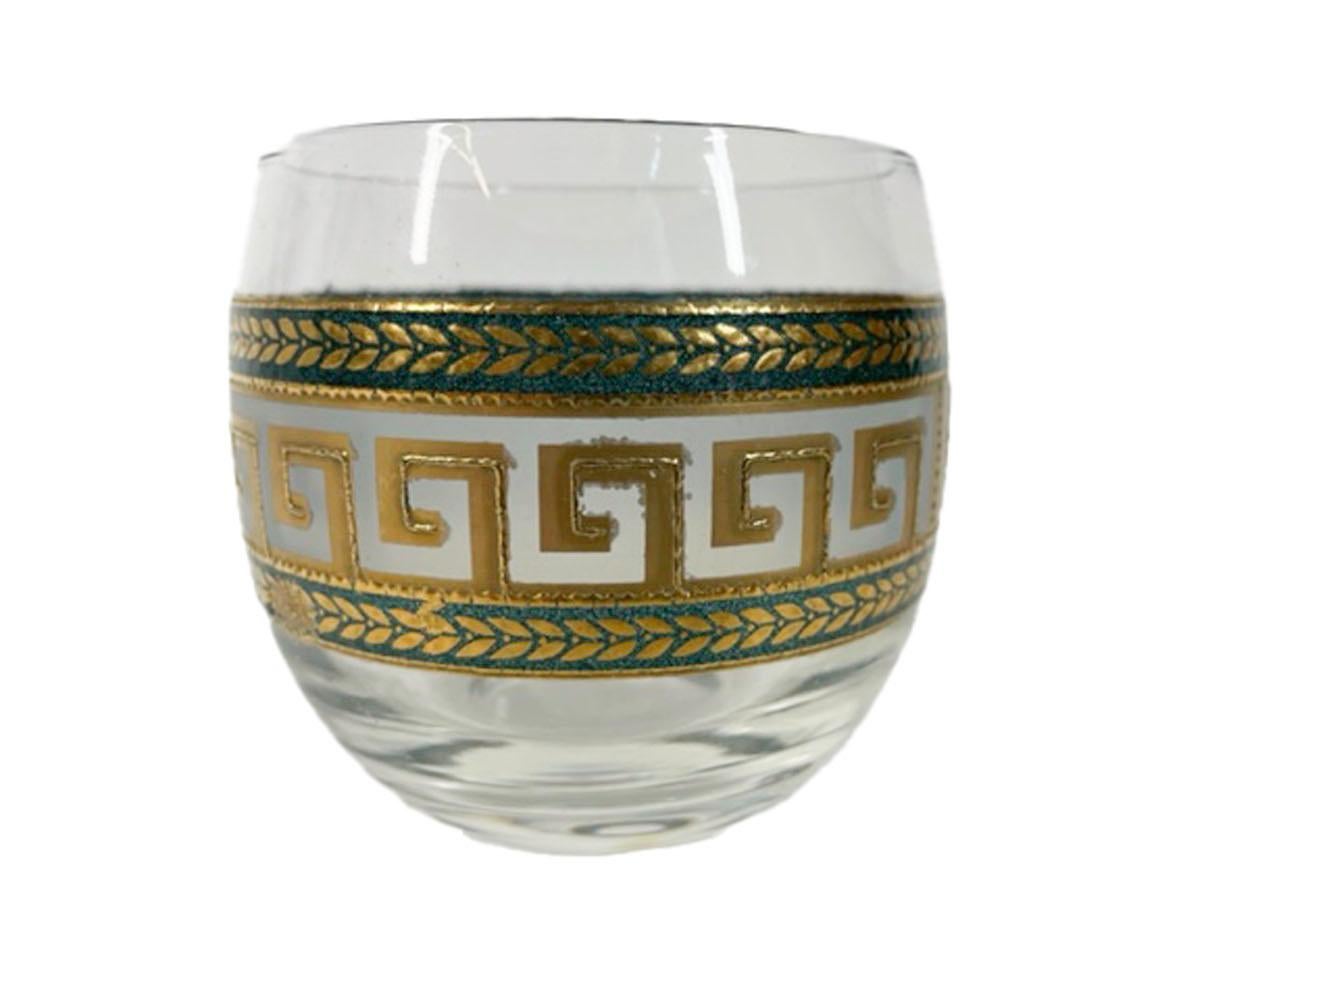 American Four Culver Roly Poly Cocktail Glasses with Greek Key Motif in 22 Karat Gold